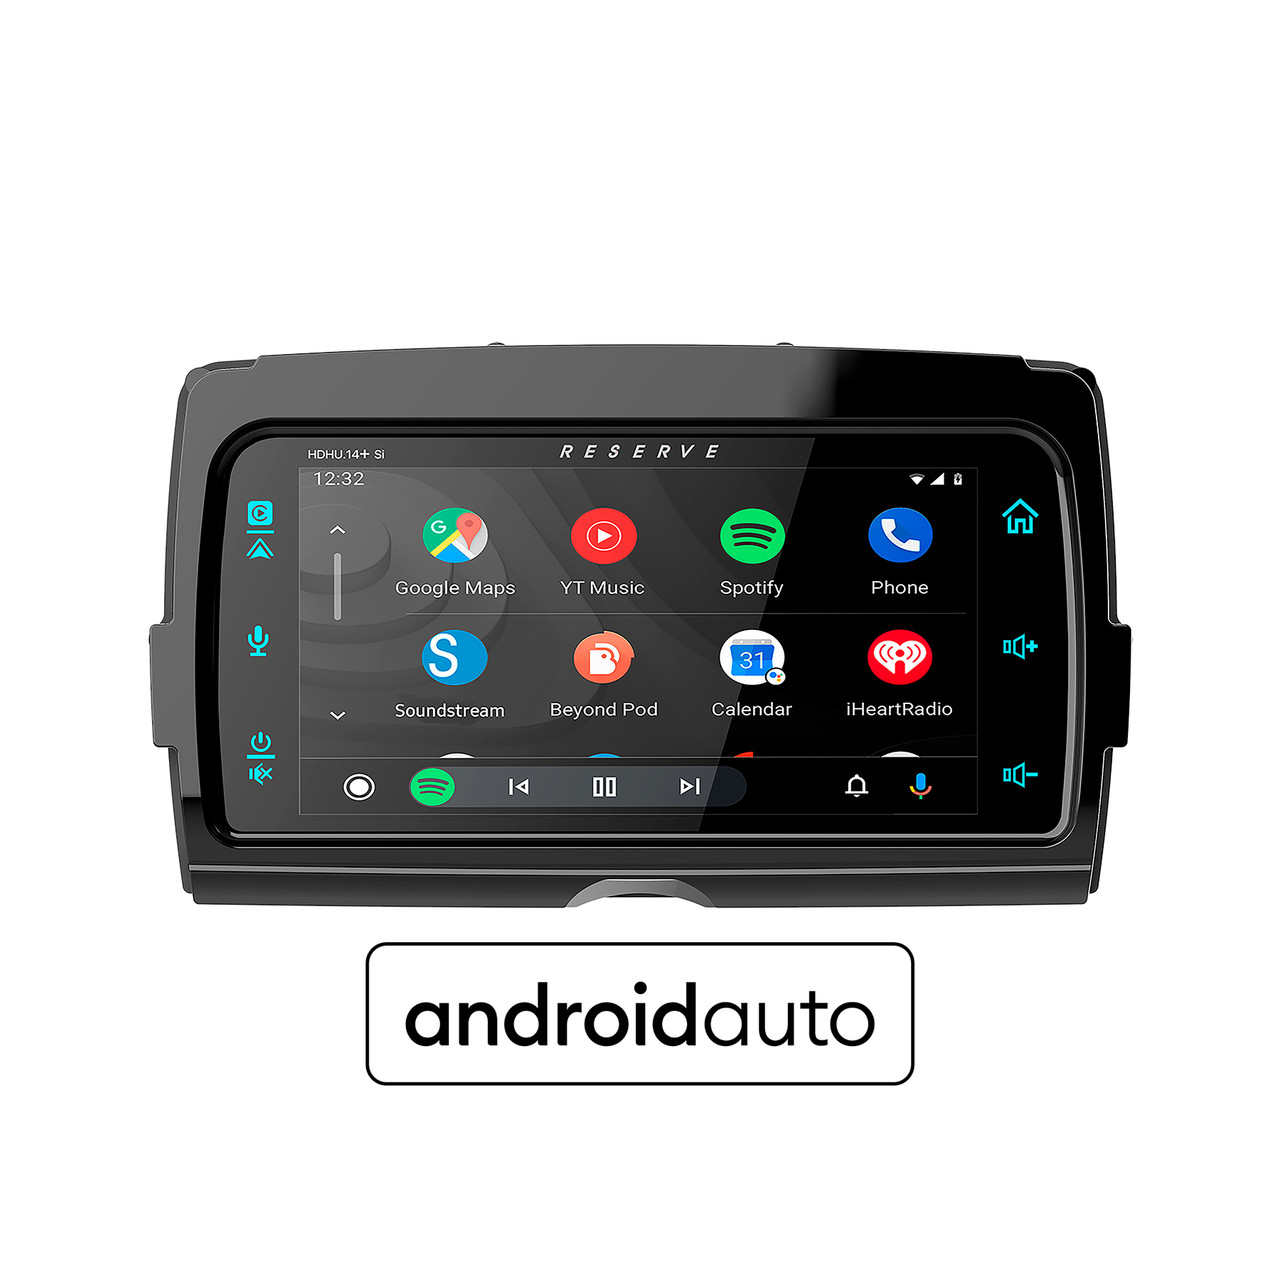 HDHU.14si-Android-Auto-Screen-Motorcycle-Audio